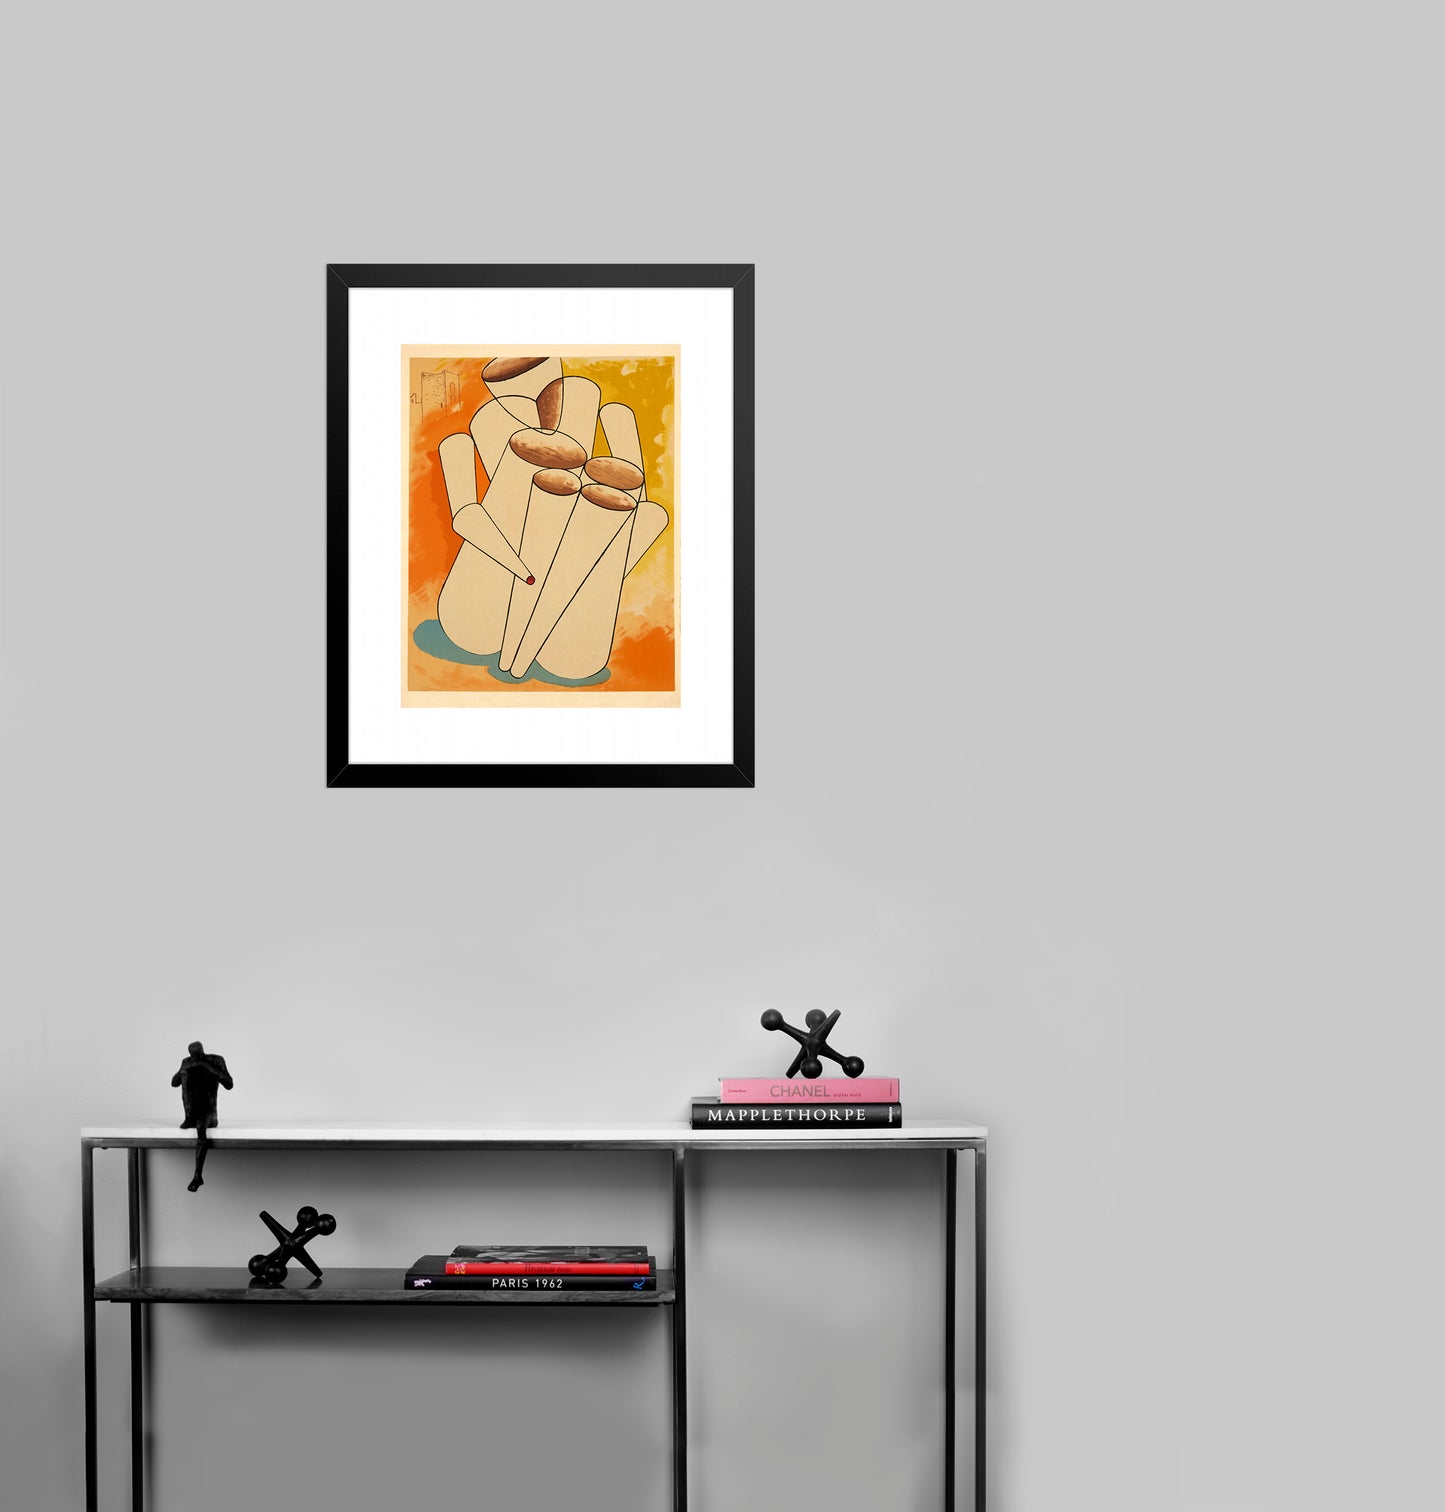 Personage by Man Ray, 1975 - Mourlot Editions - Fine_Art - Poster - Lithograph - Wall Art - Vintage - Prints - Original